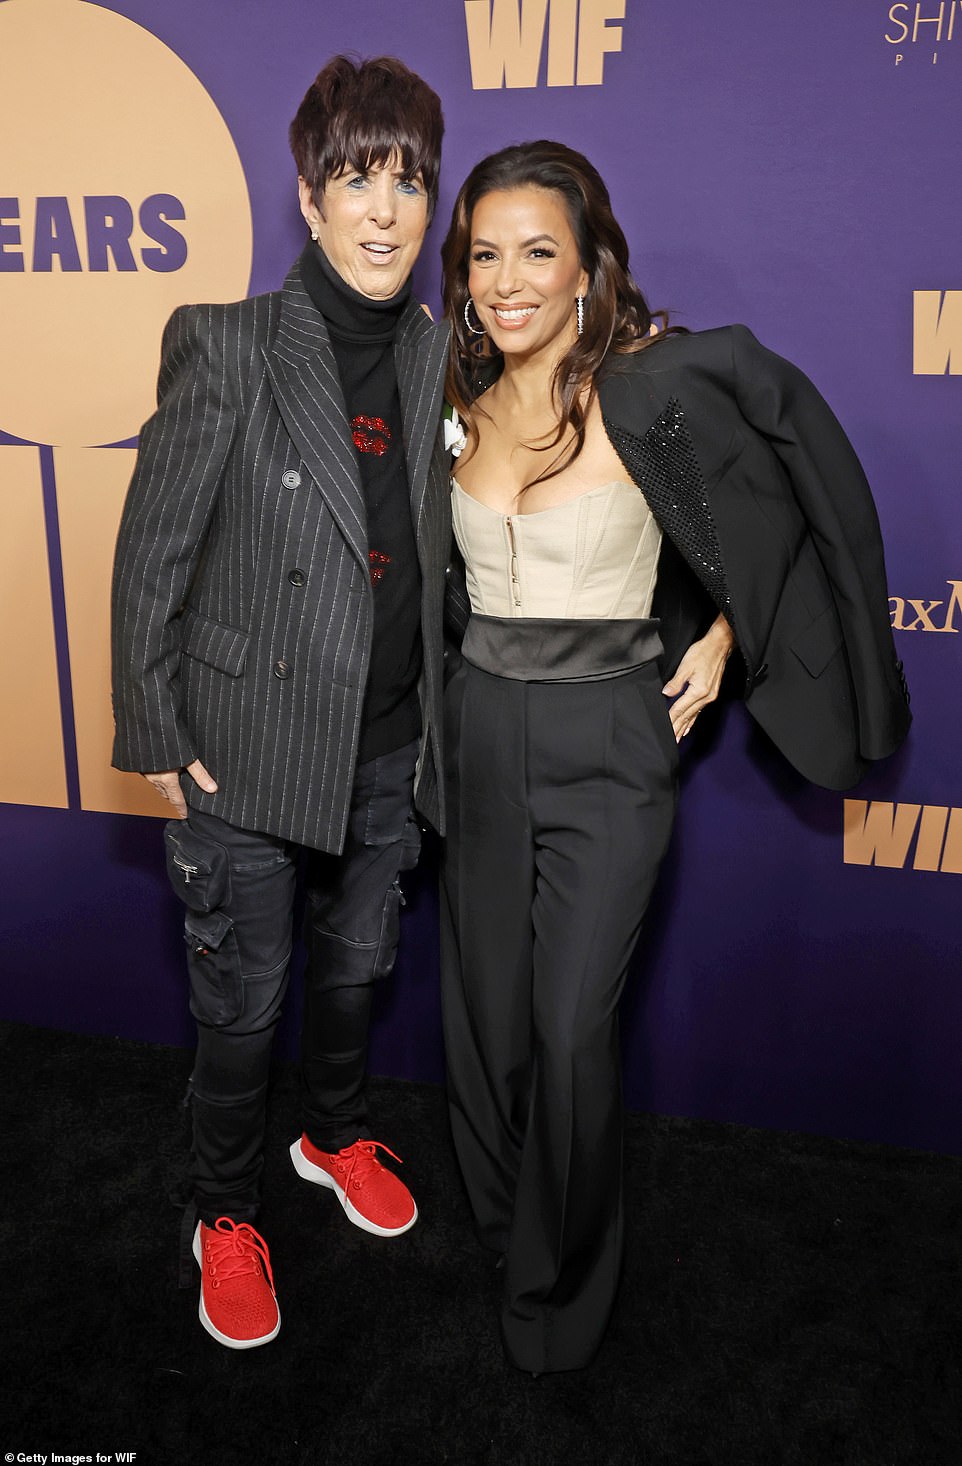 She also posed with legendary songwriter Diane Warren on the red carpet